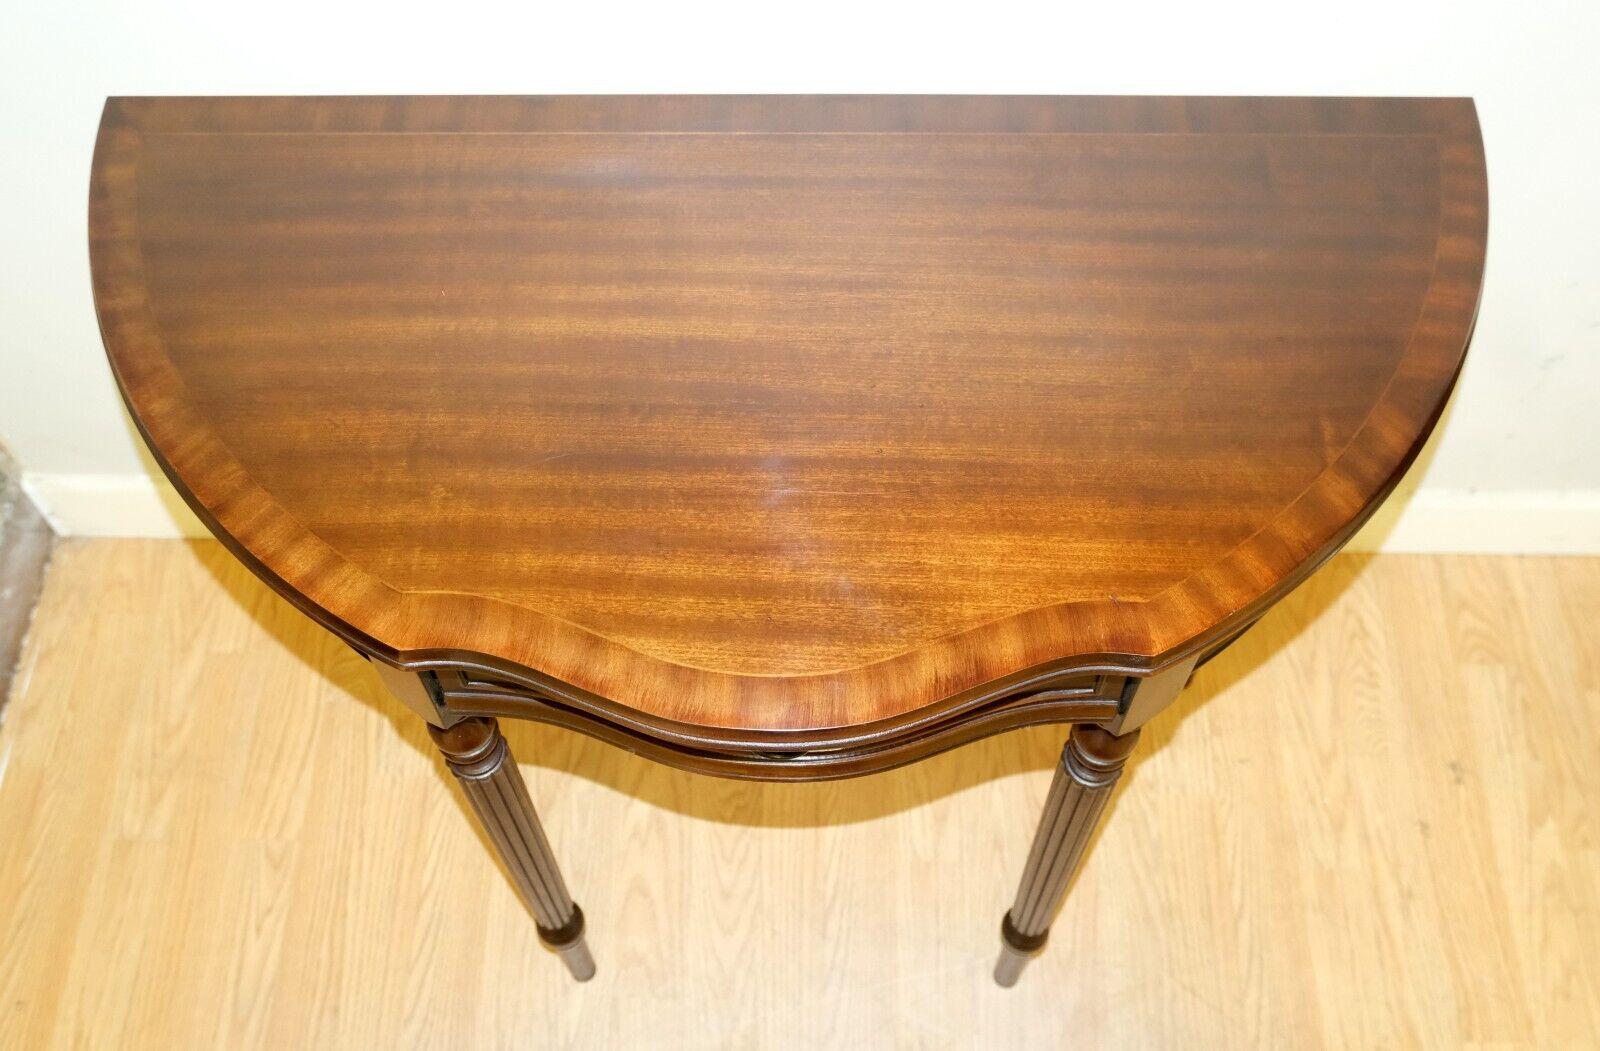 We are delighted to offer for sale this charming brown mahogany demi lune console table on reeded legs.

This versatile console/demi lune table is ideally shaped to decorate your hallway without taking up much space. The item is raised on four